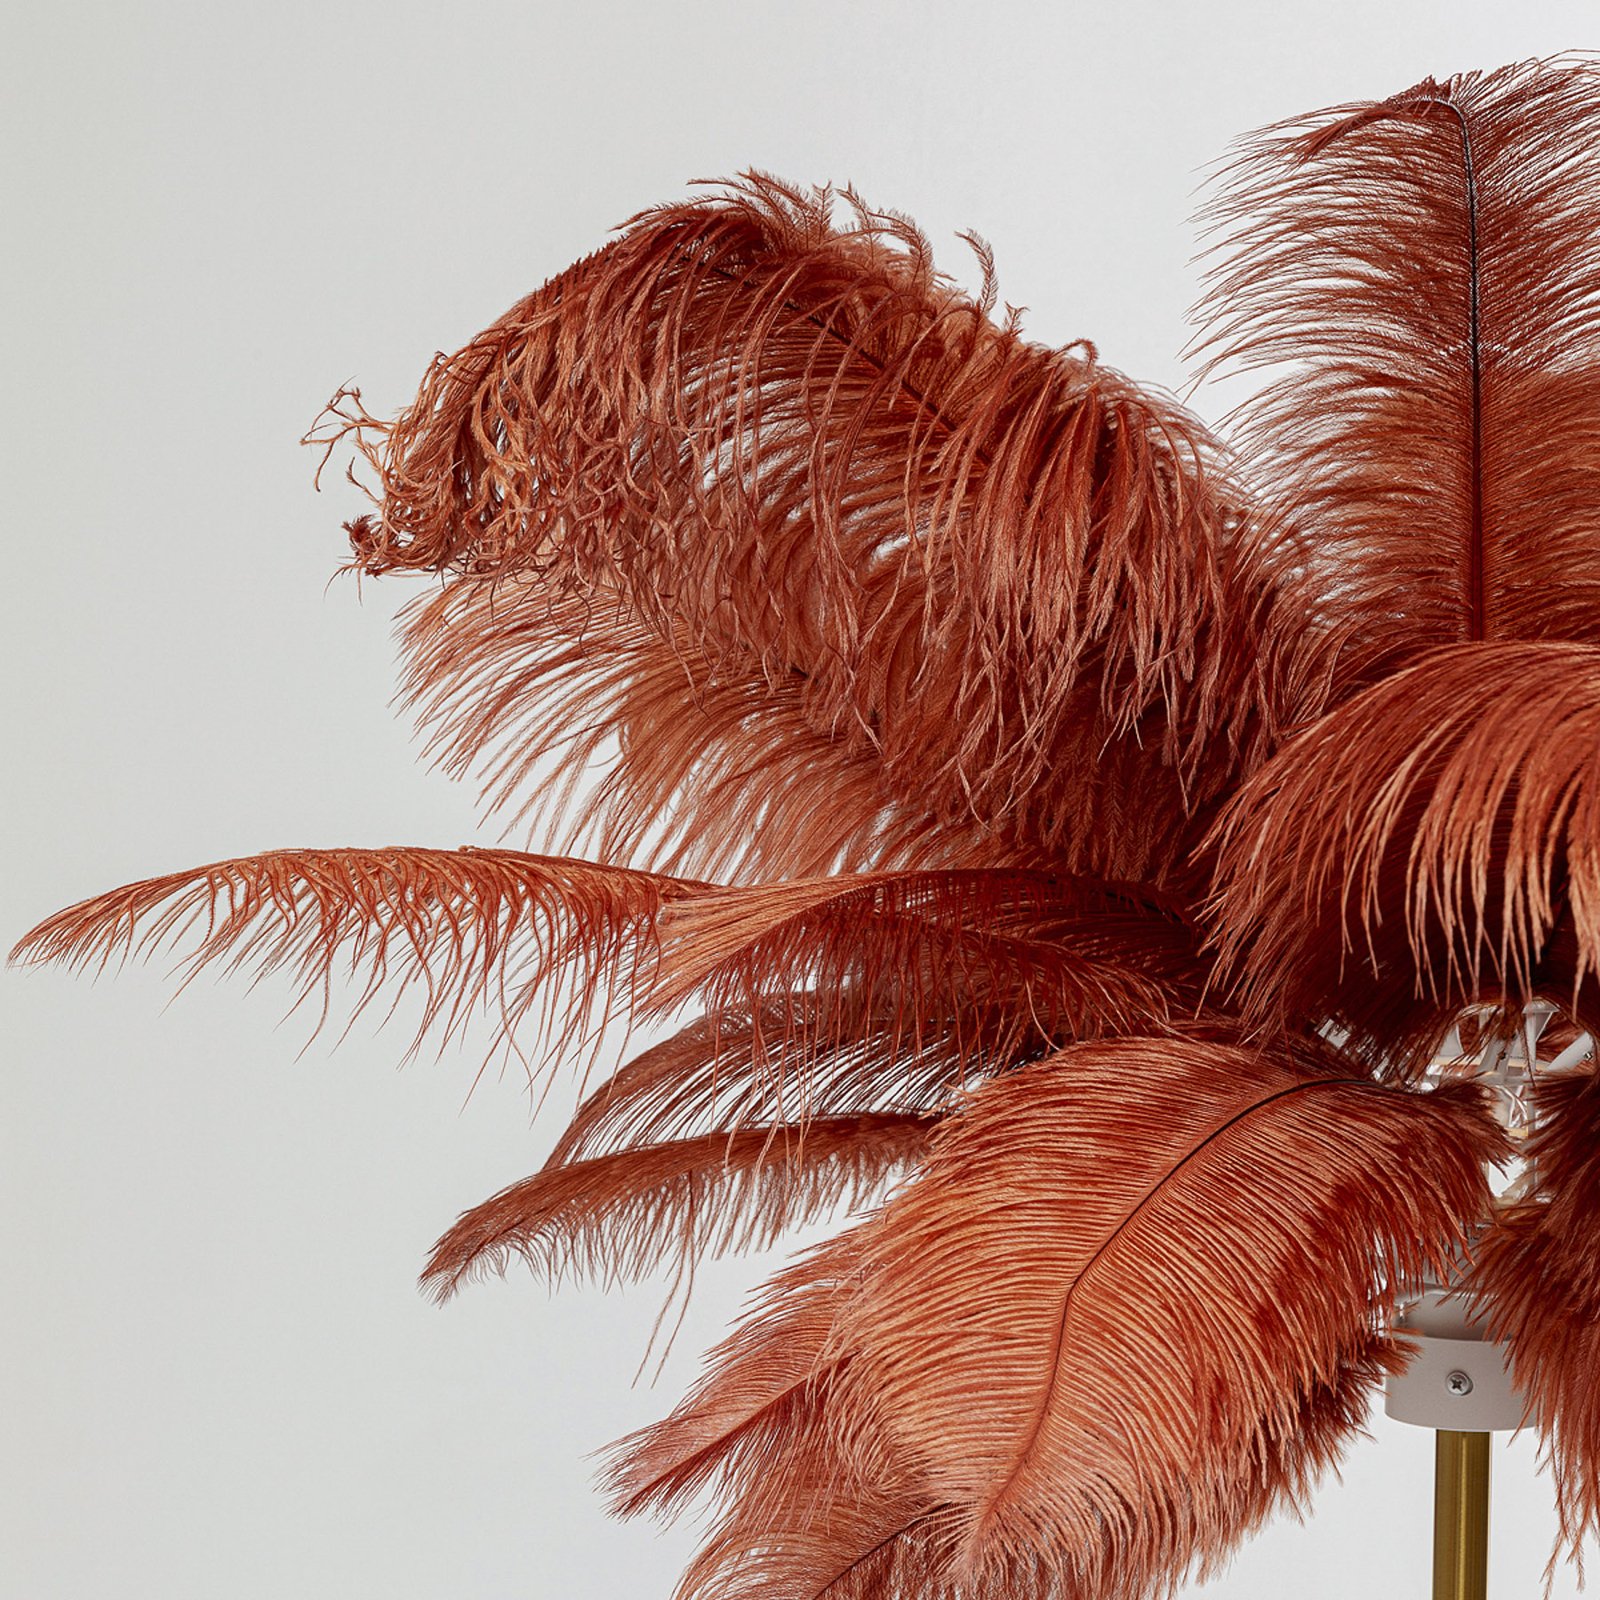 KARE Feather Palm floor lamp feathers, rust red